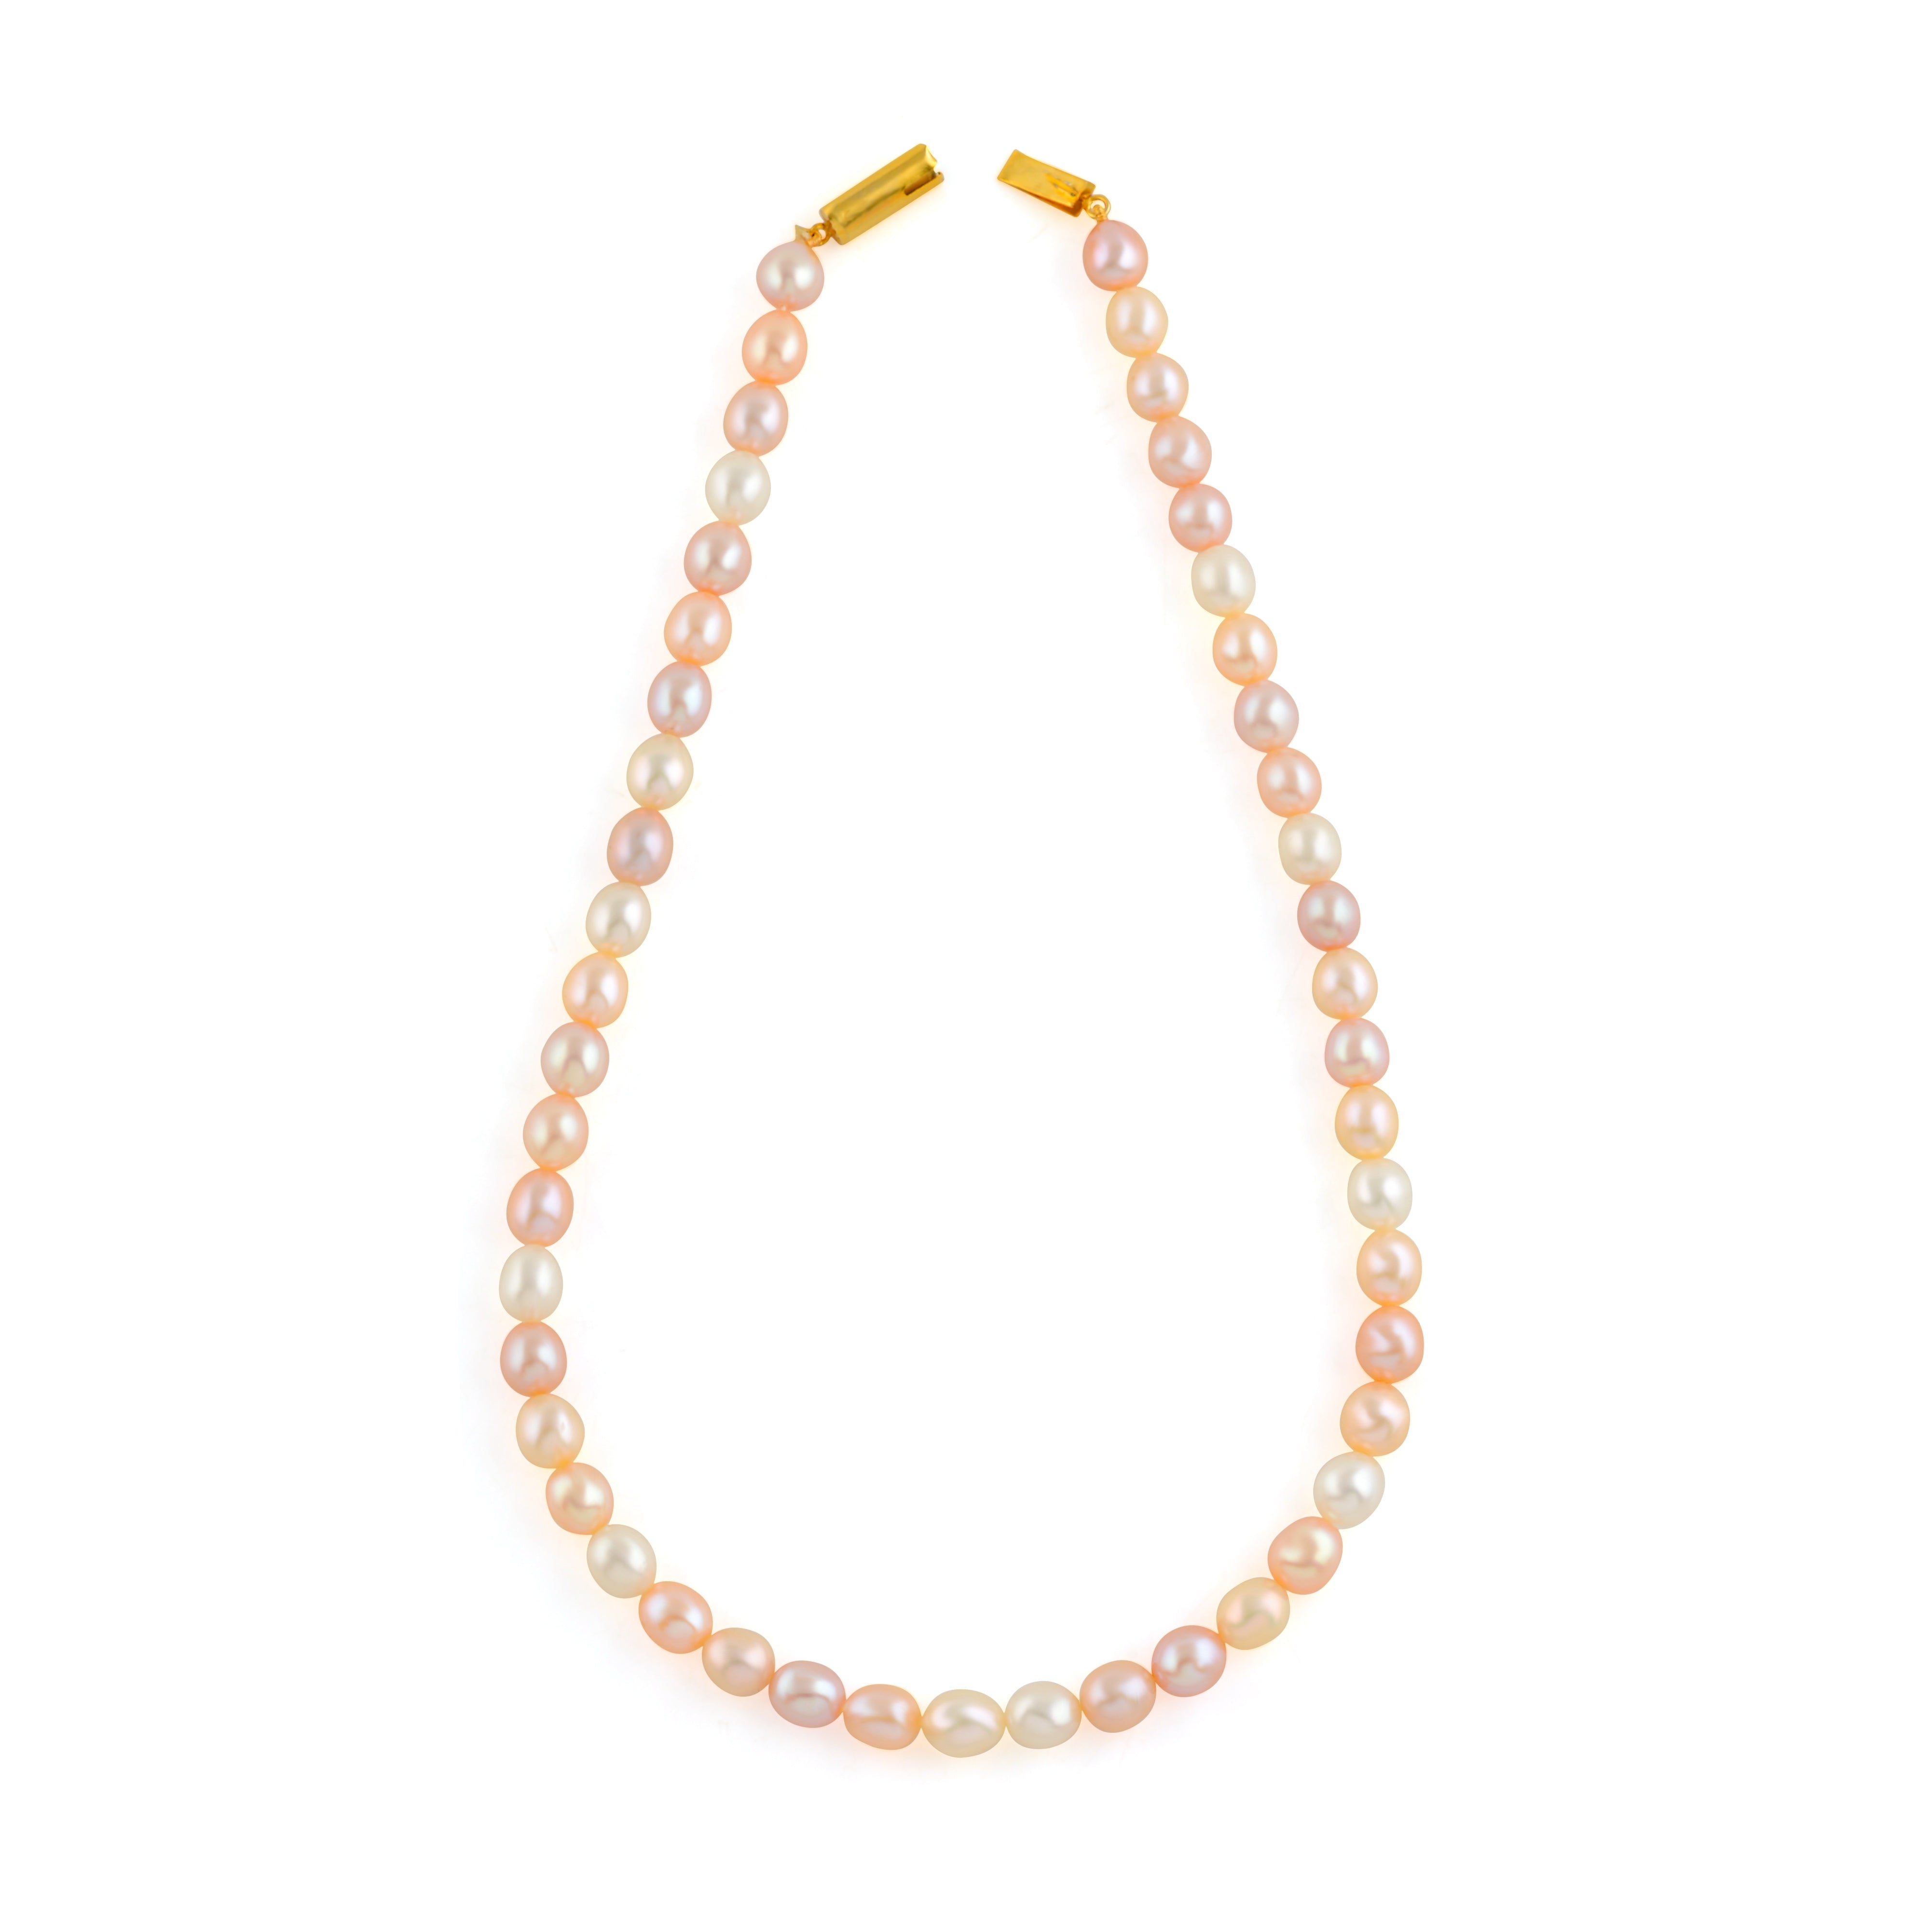 Multicolored Oval Shape Pearl Necklace - Krishna Jewellers Pearls and Gems